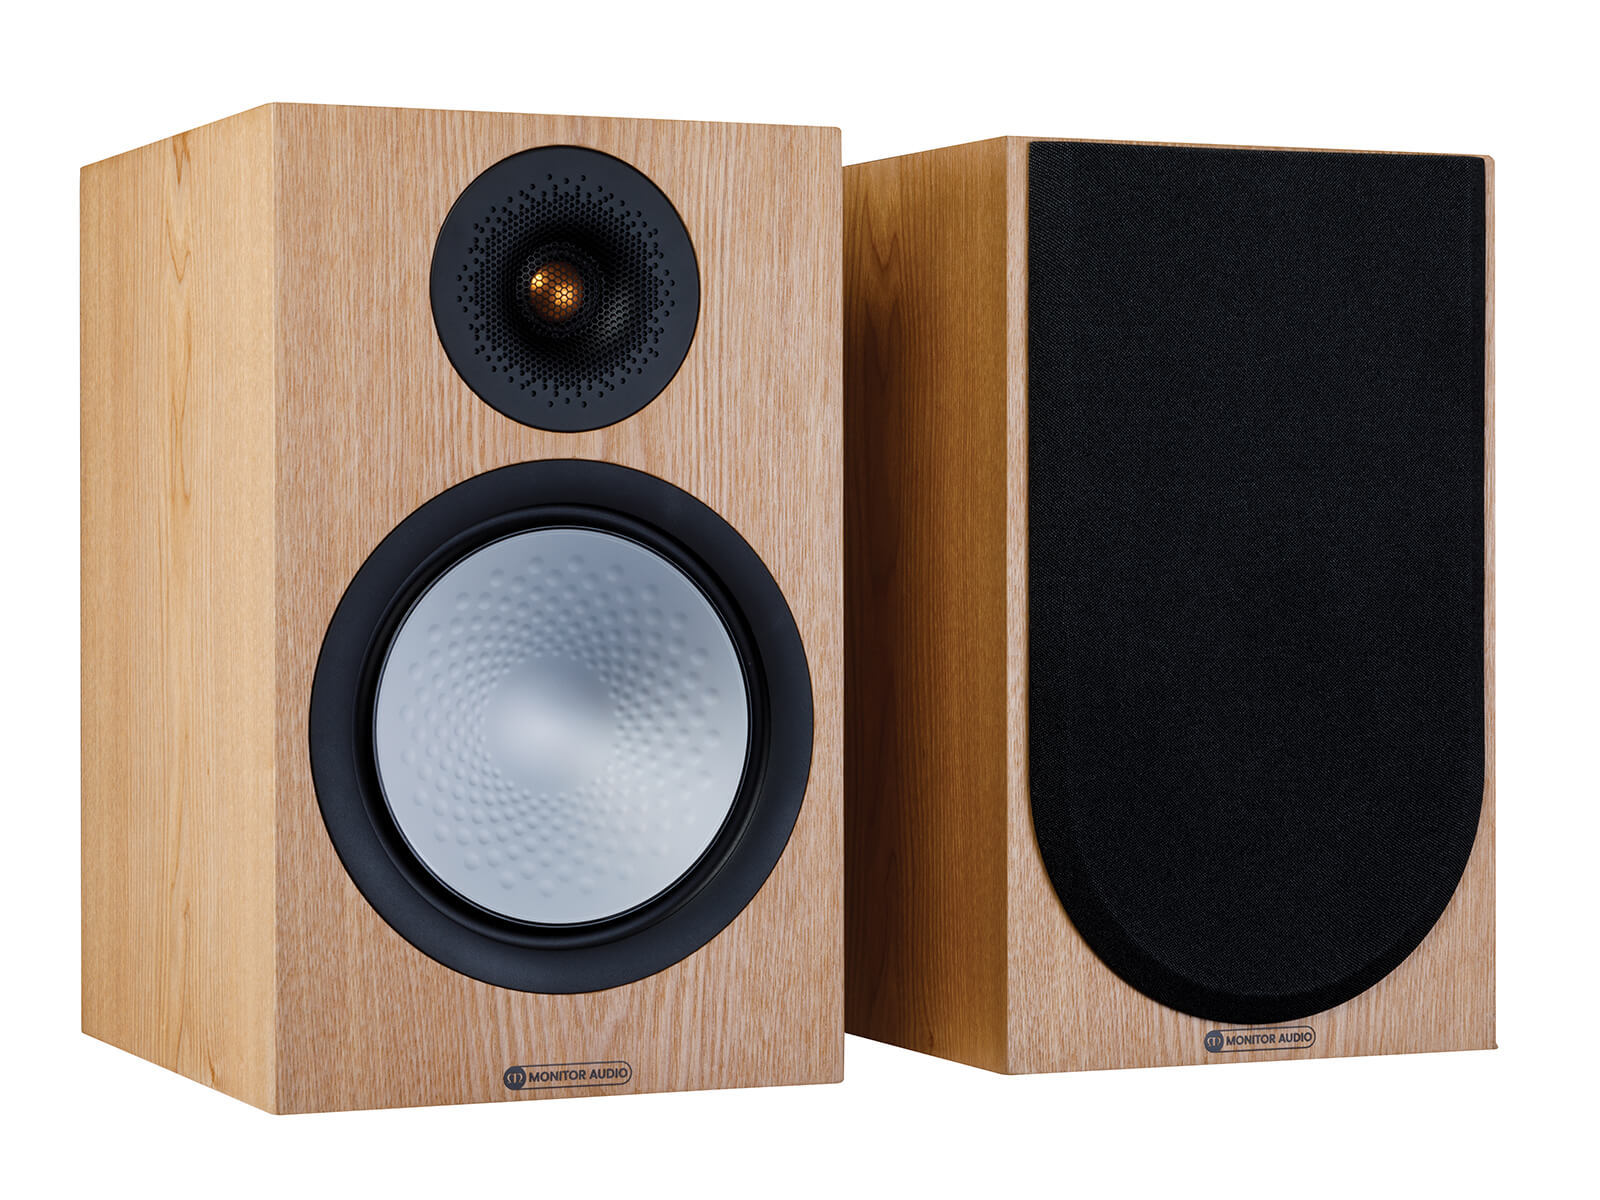 A pair of Monitor Audio's Silver 100 7G, in an ash finish, iso view, with and without grilles.